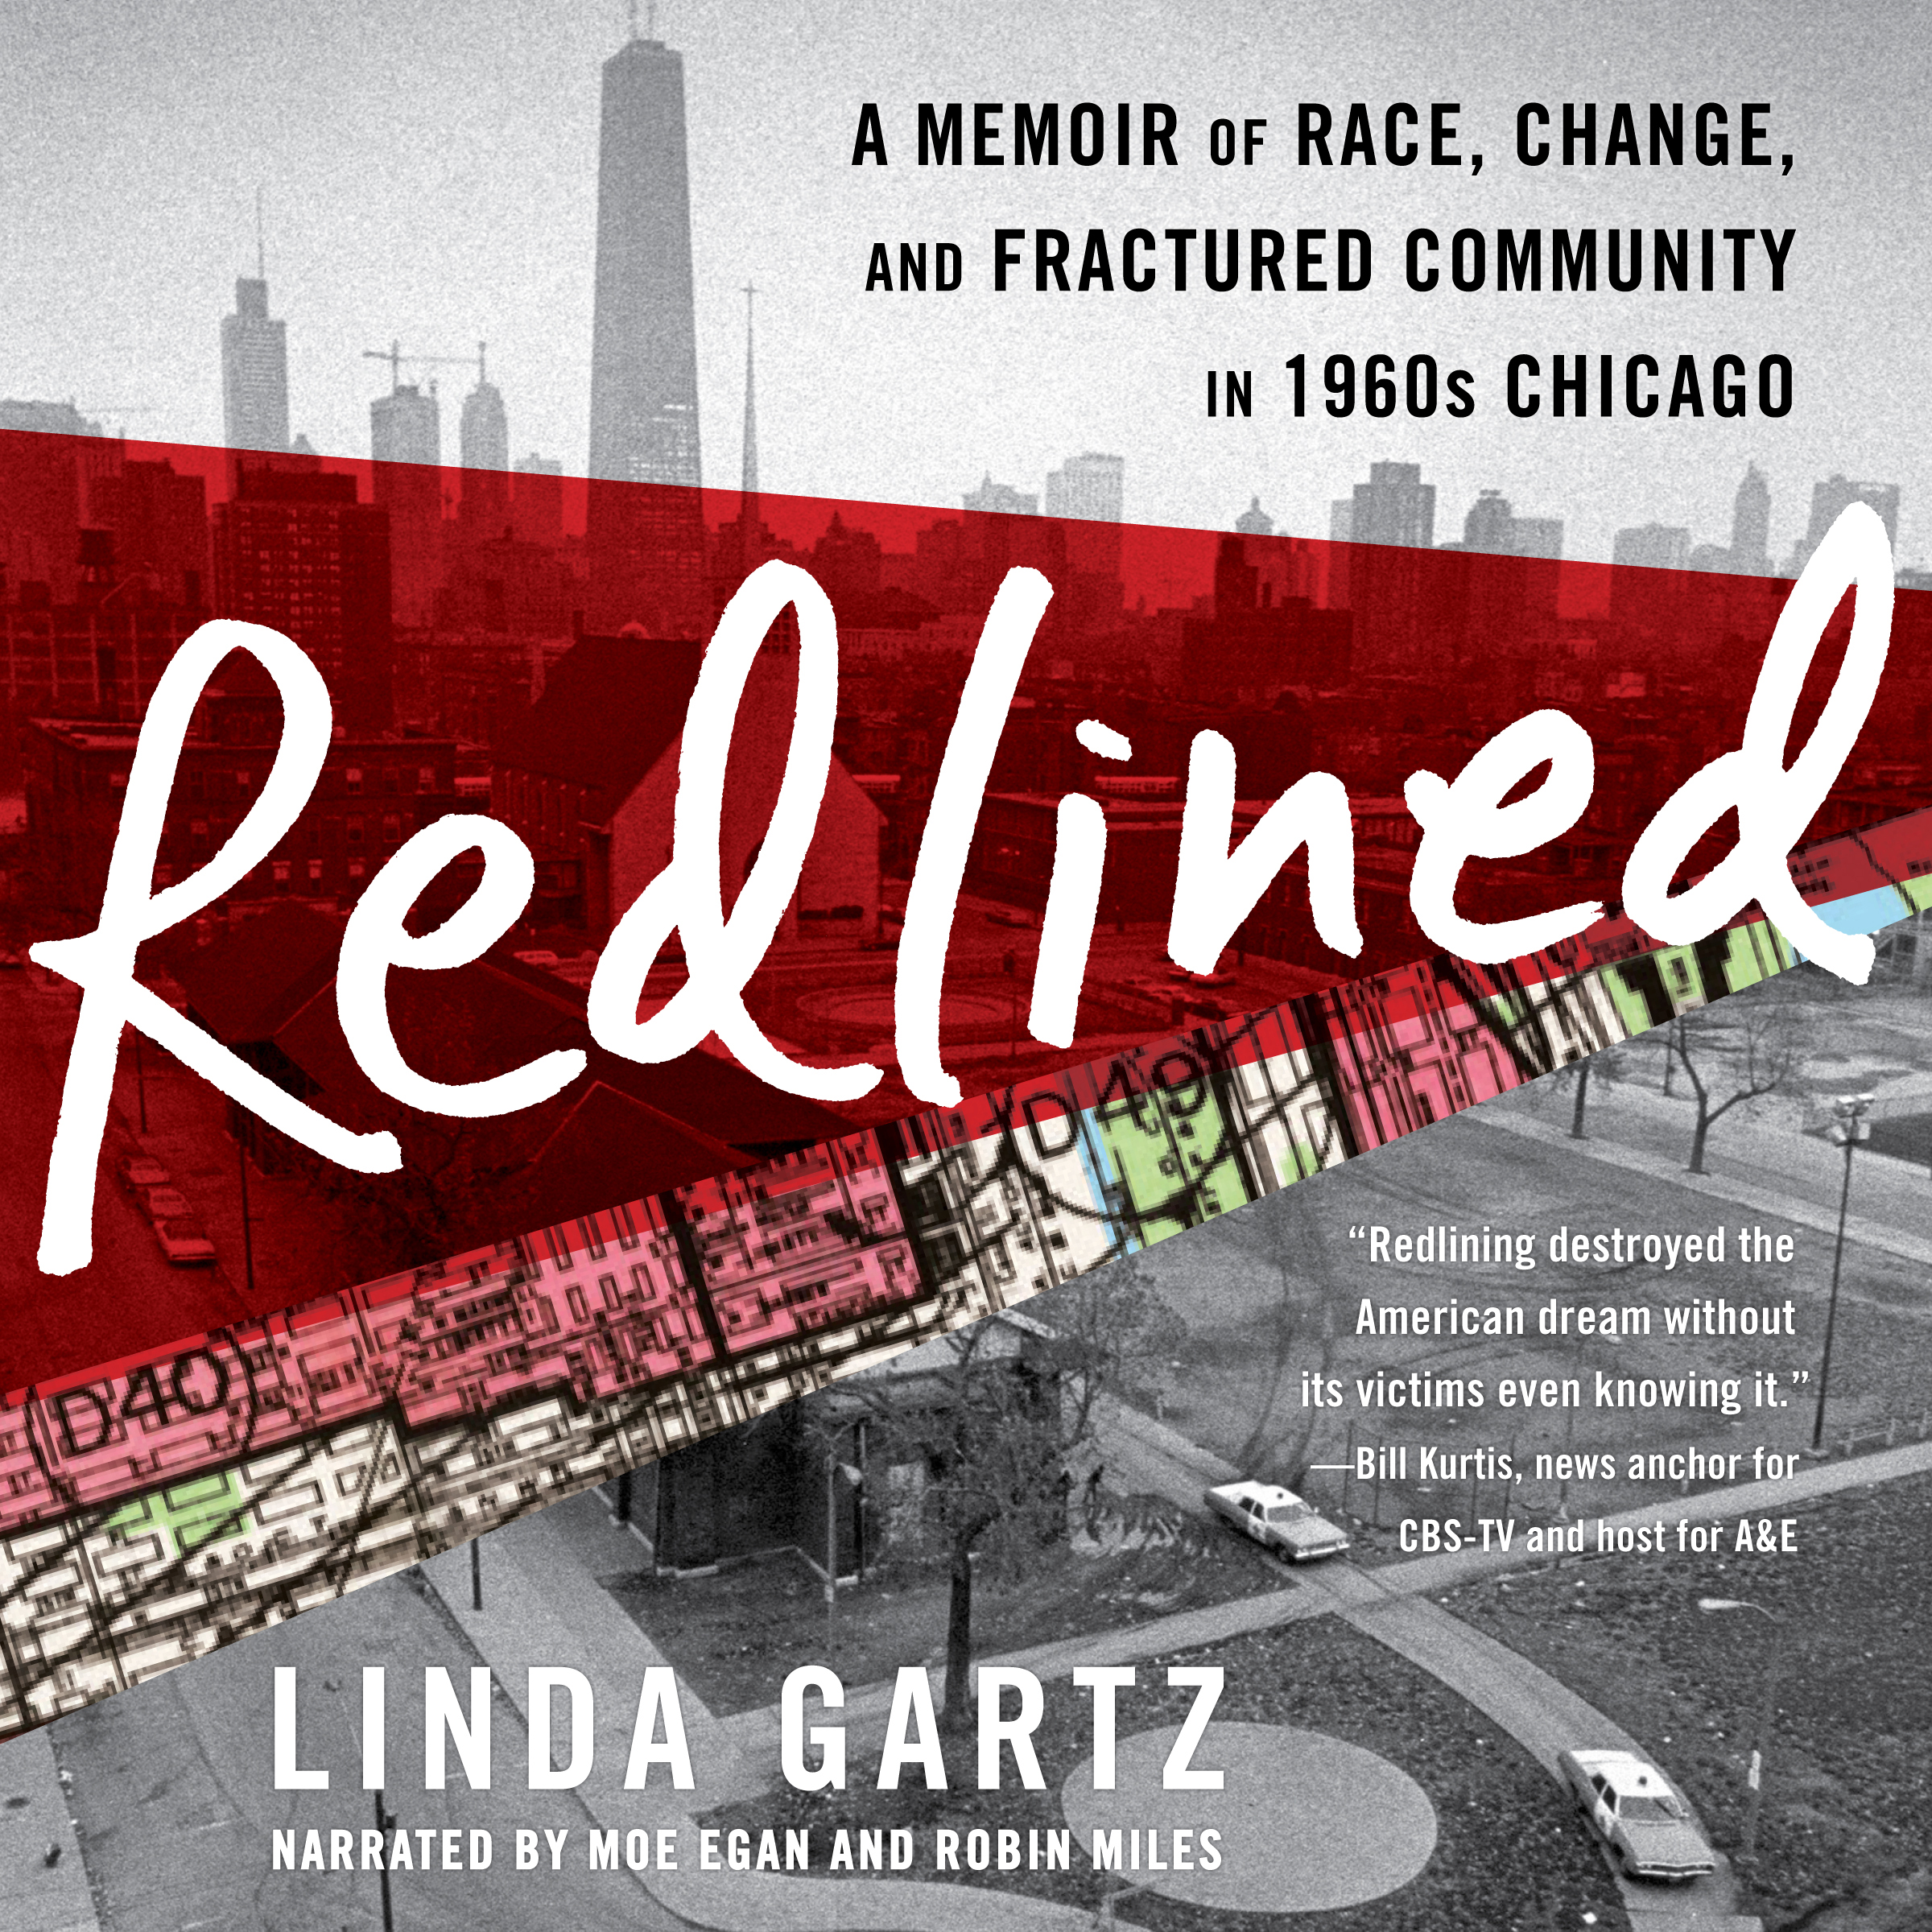 Audiobook of “Redlined” coming with two wonderful narrators